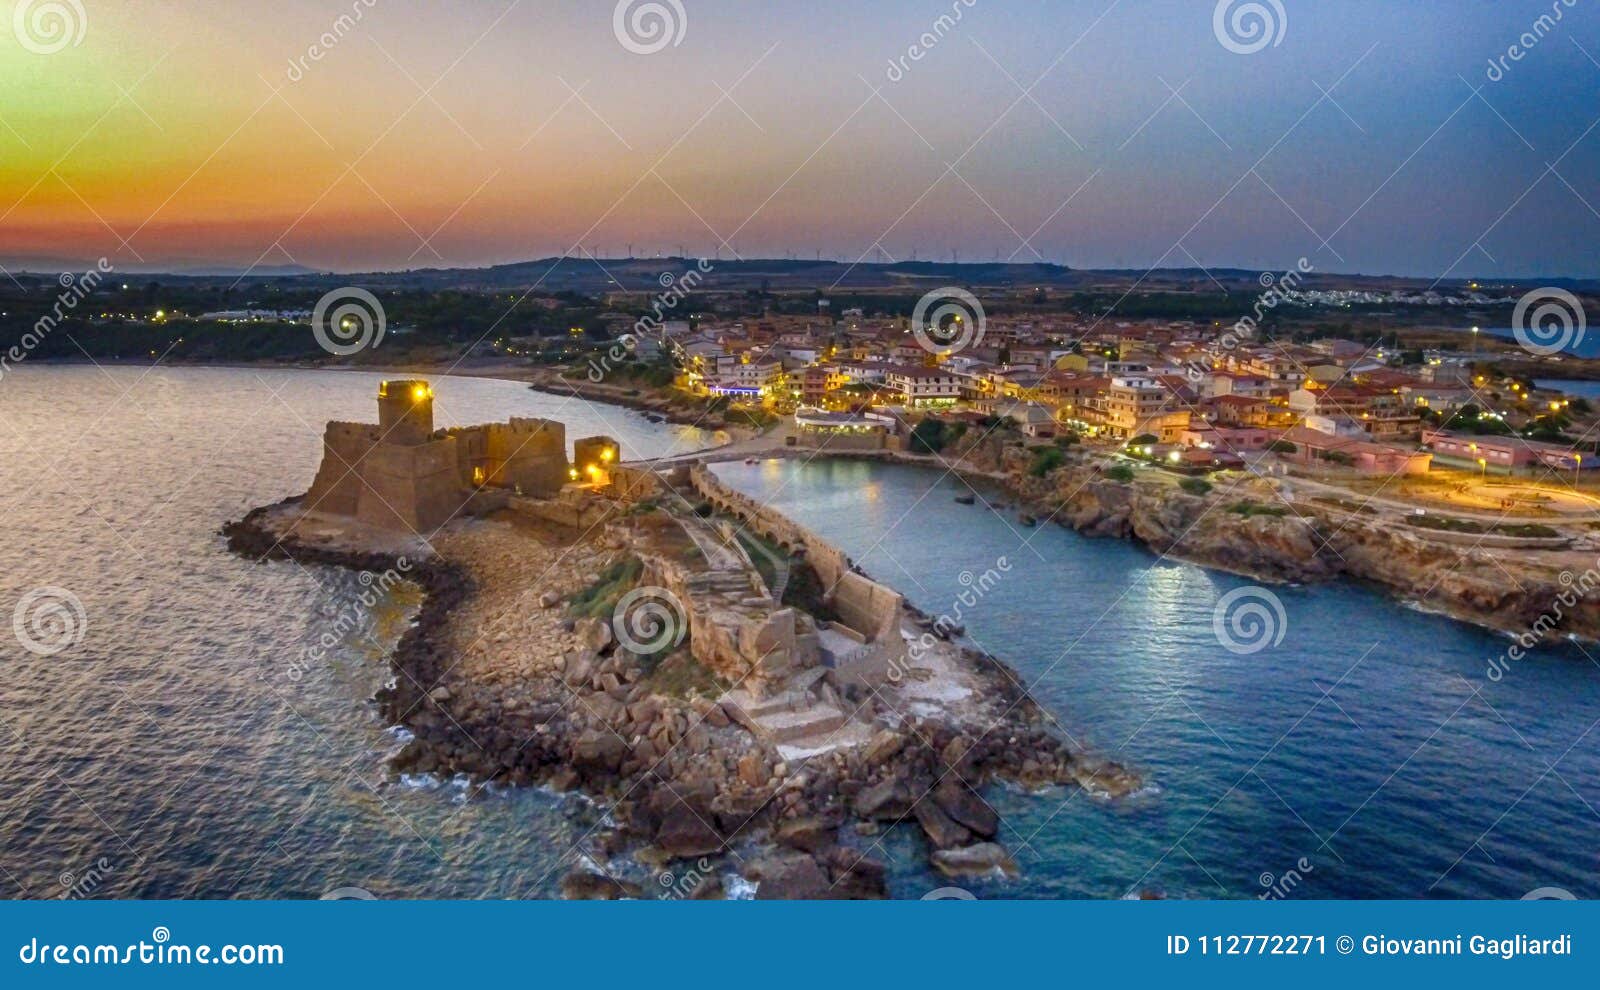 aerial view of aragonese fortress at sunset, le castella - italy